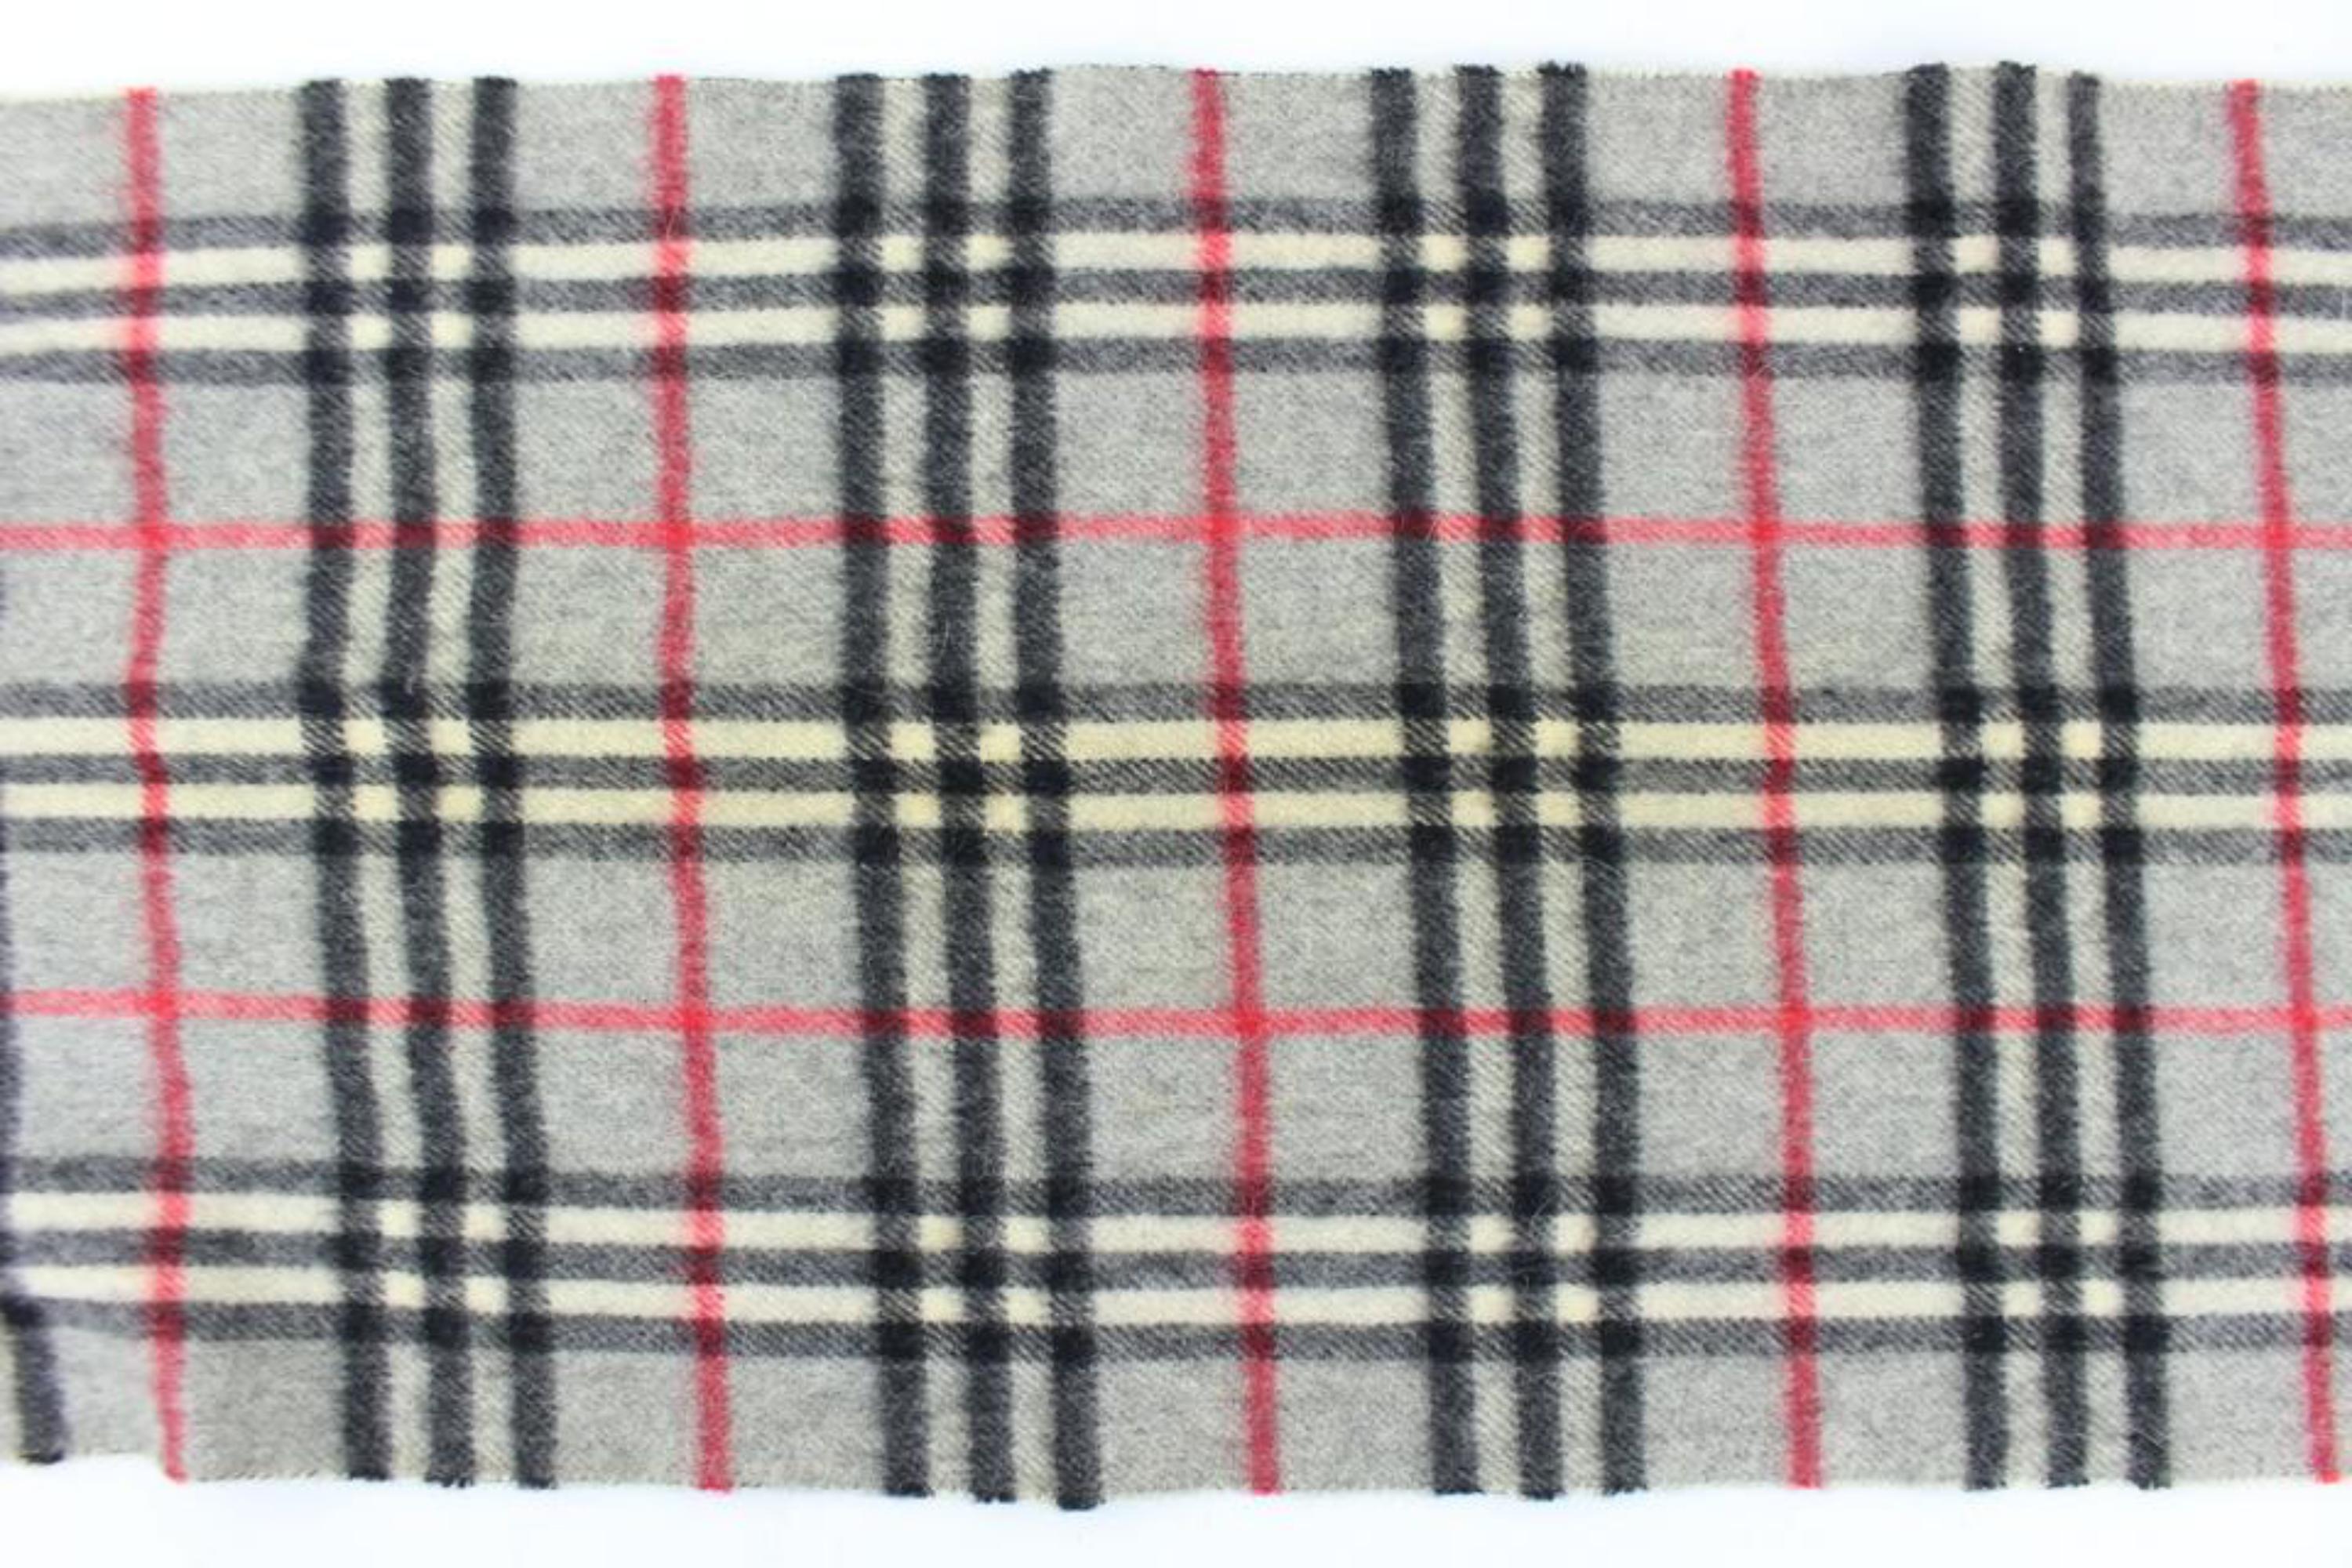 Burberry London Grey Nova Check Cashmere 7buj1026 Scarf/Wrap In Good Condition For Sale In Forest Hills, NY